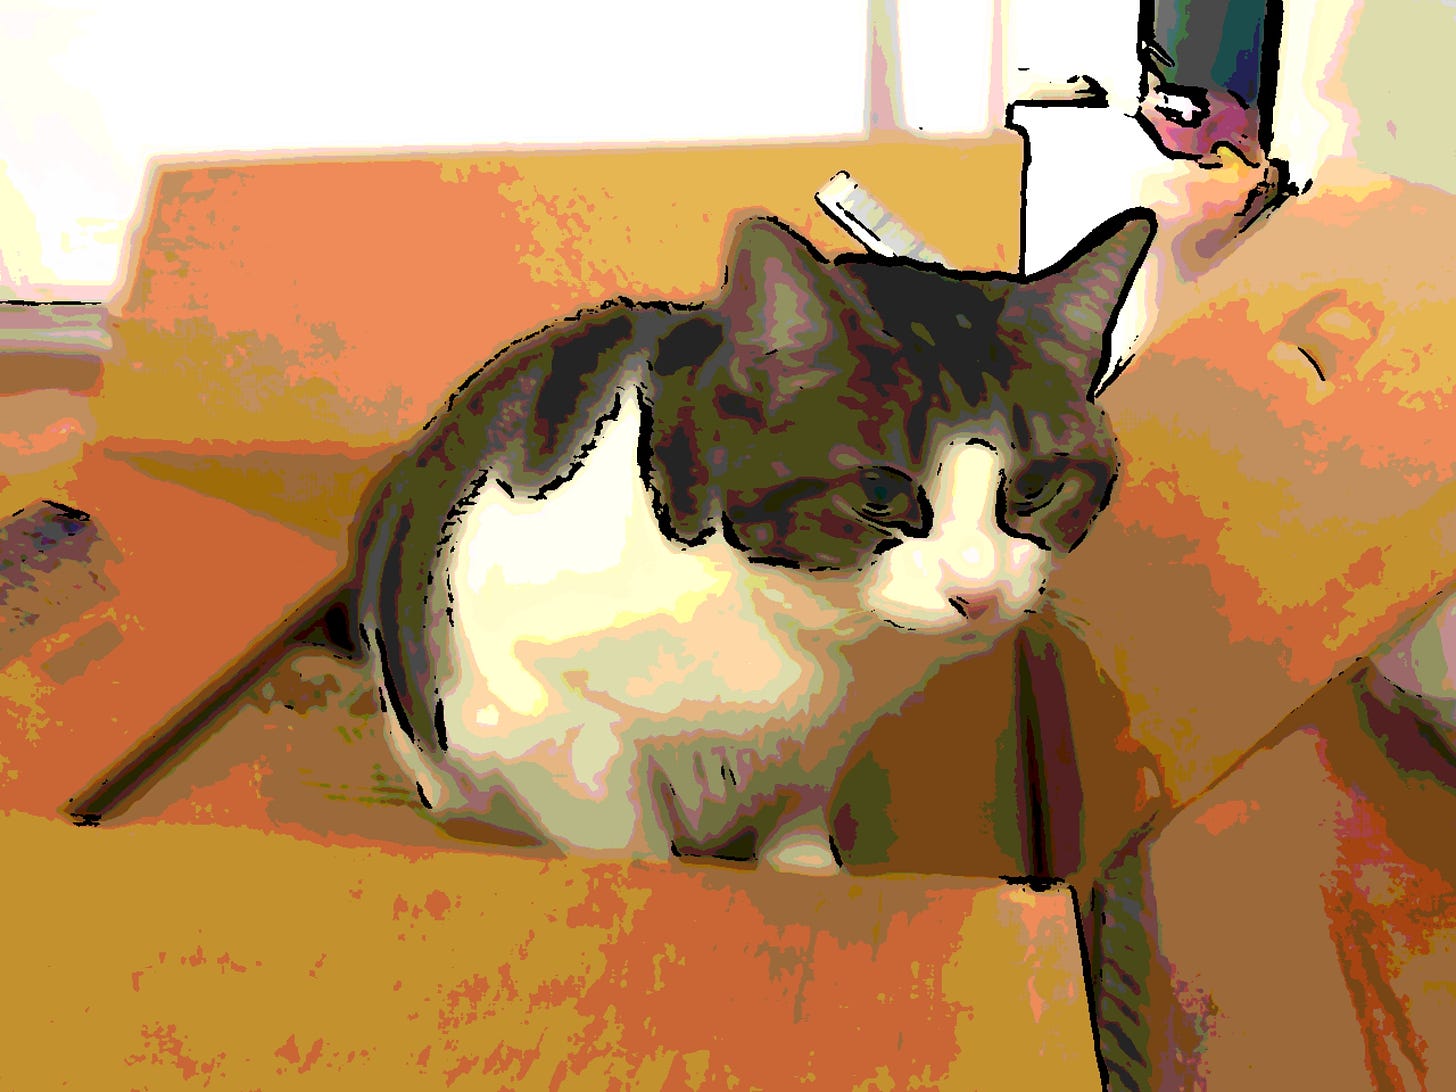 My cat Stevie sitting in a cardboard box. Photo uses a cartoon filter.